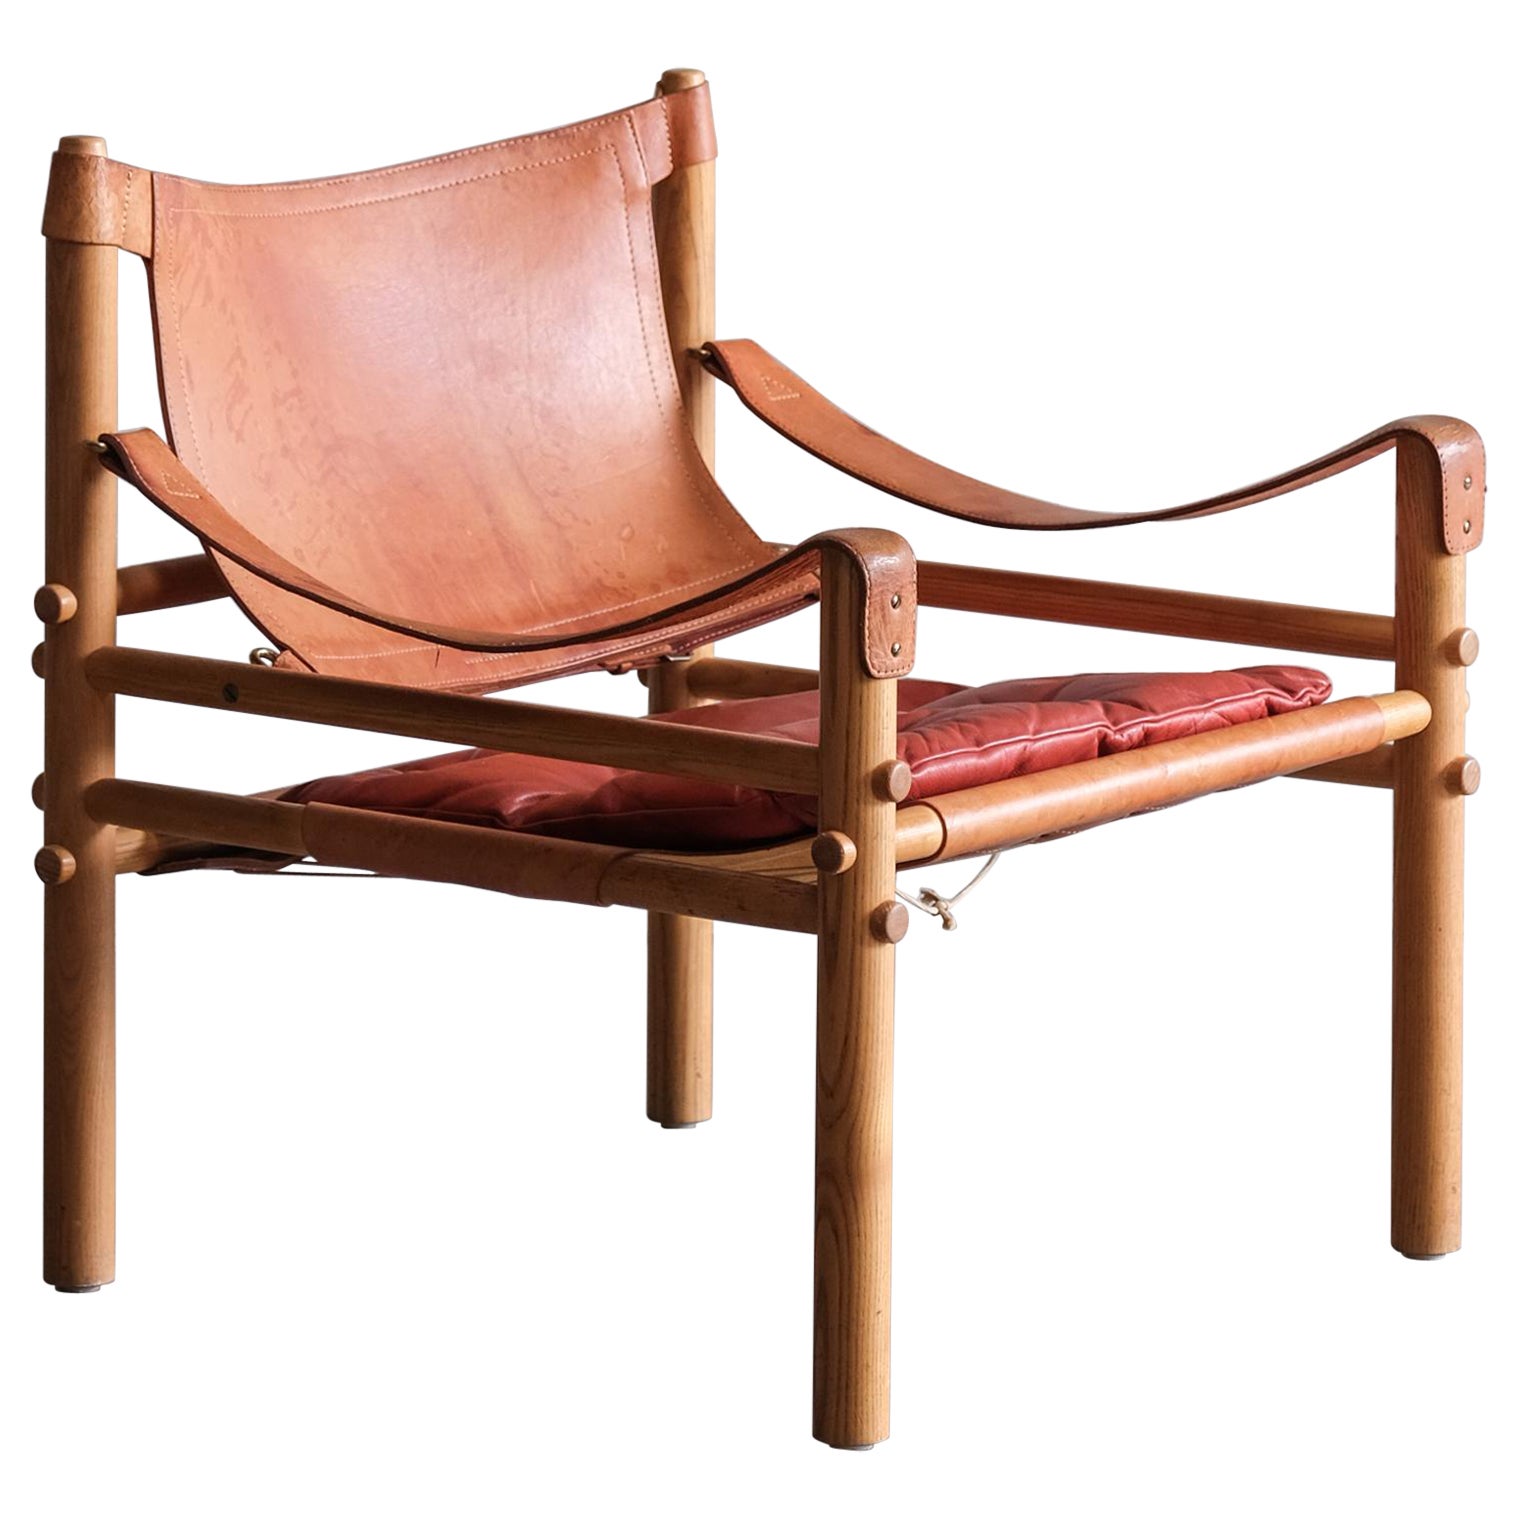 Sirocco Safari chair by Arne Norell in red leather, Sweden 1970